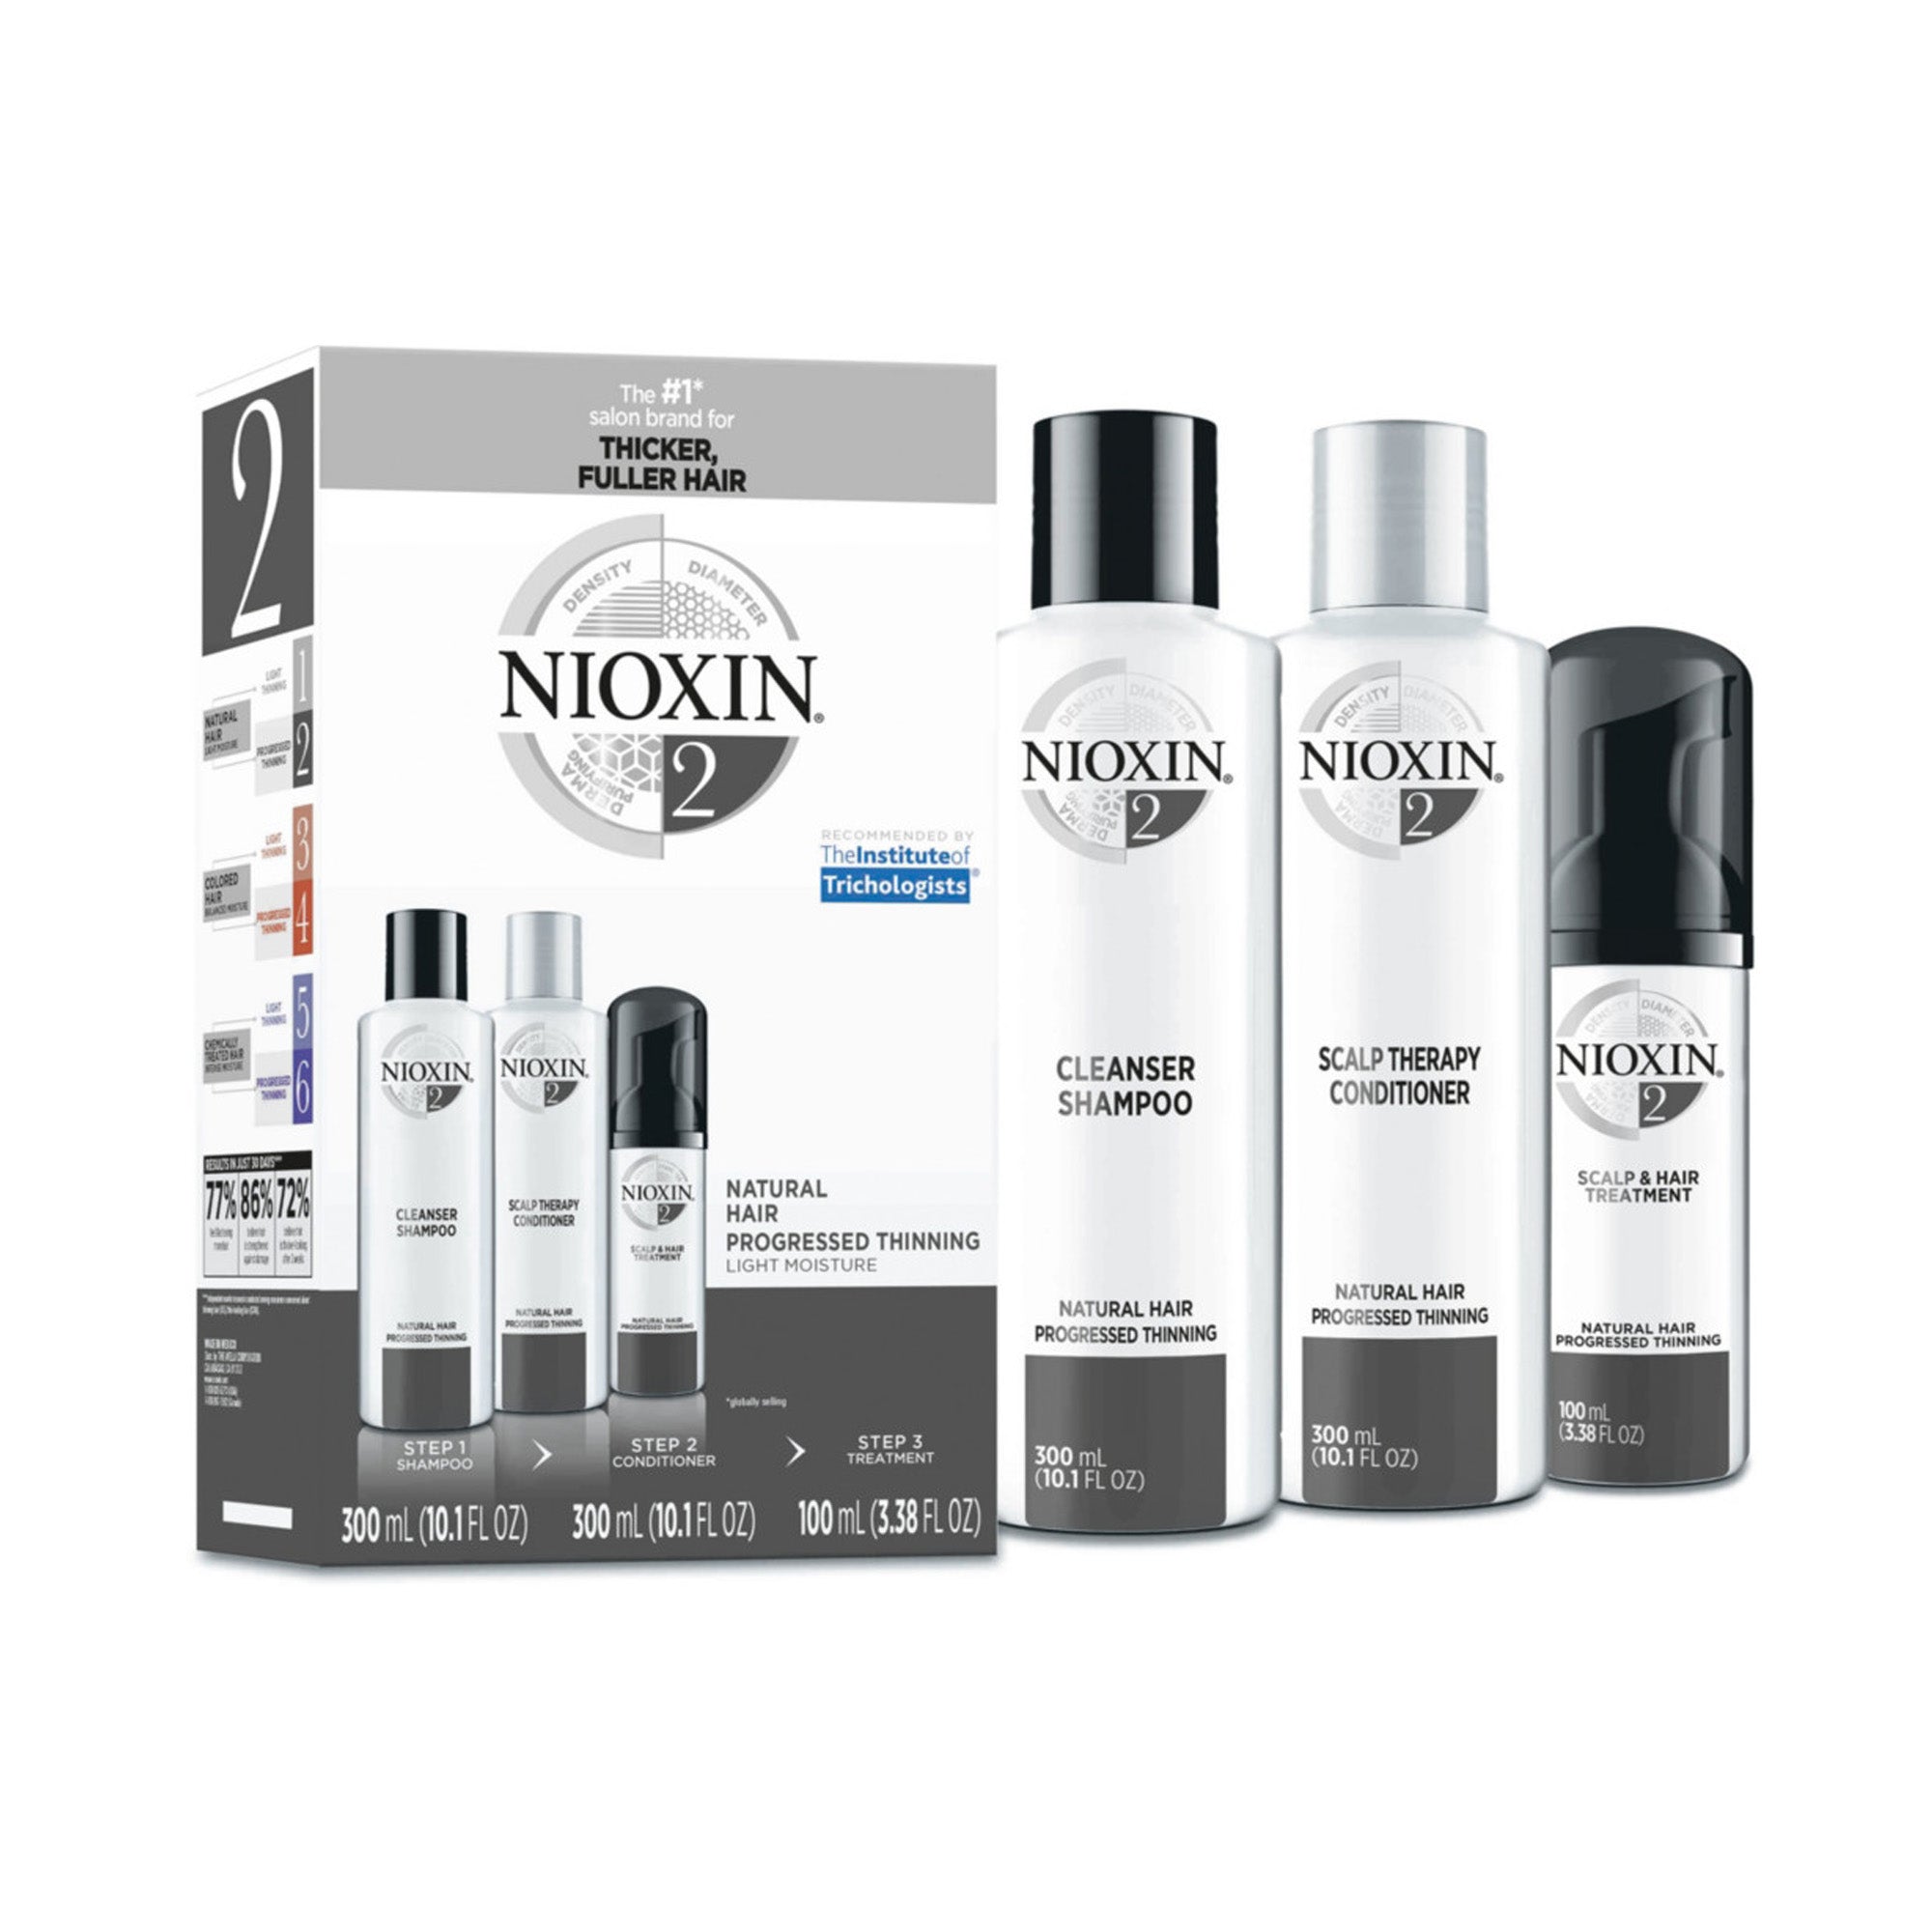 Nioxin Hair Care Kit System 2, Fine/Normal Hair with Progressed Thinning